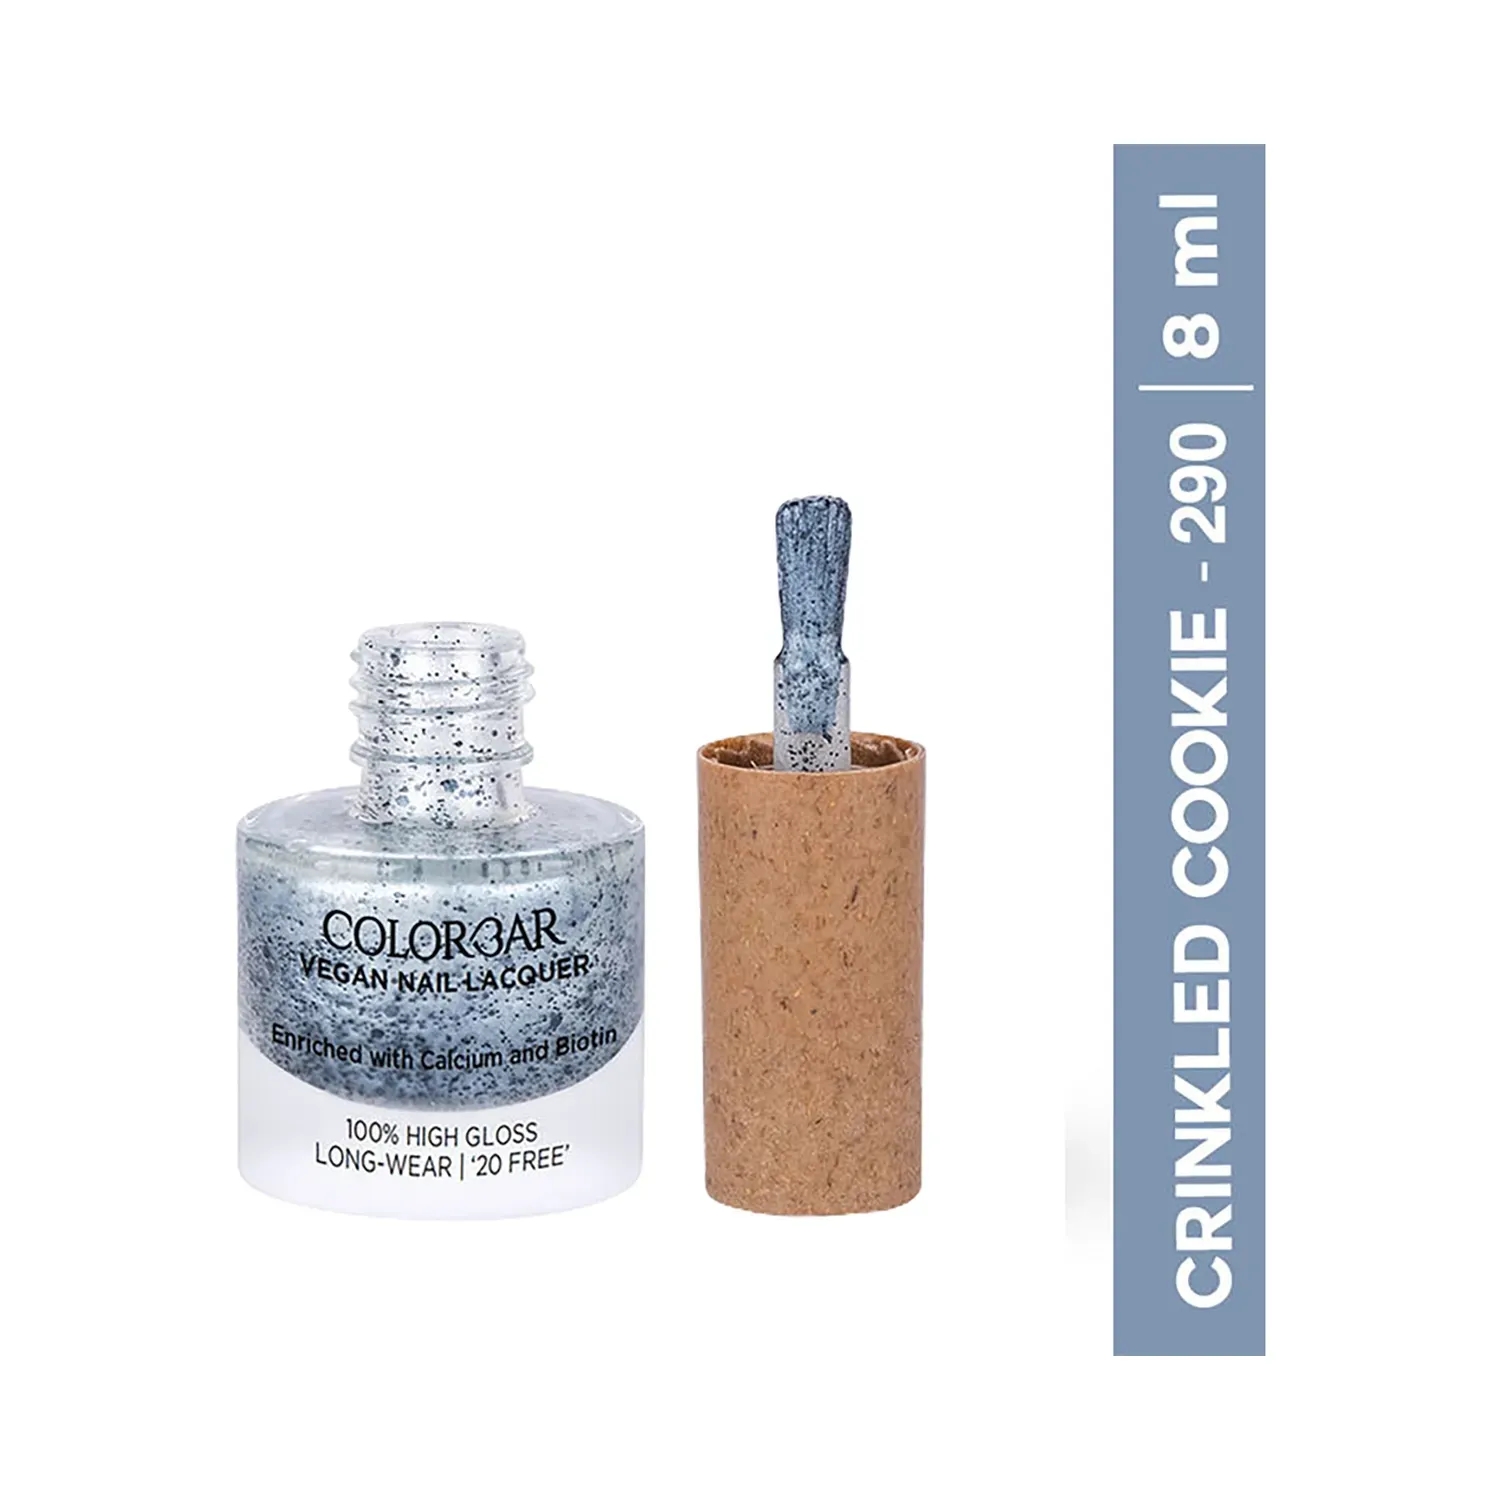 Colorbar | Colorbar Vegan Nail Lacquer - 290 Crinkled cookie (8ml)